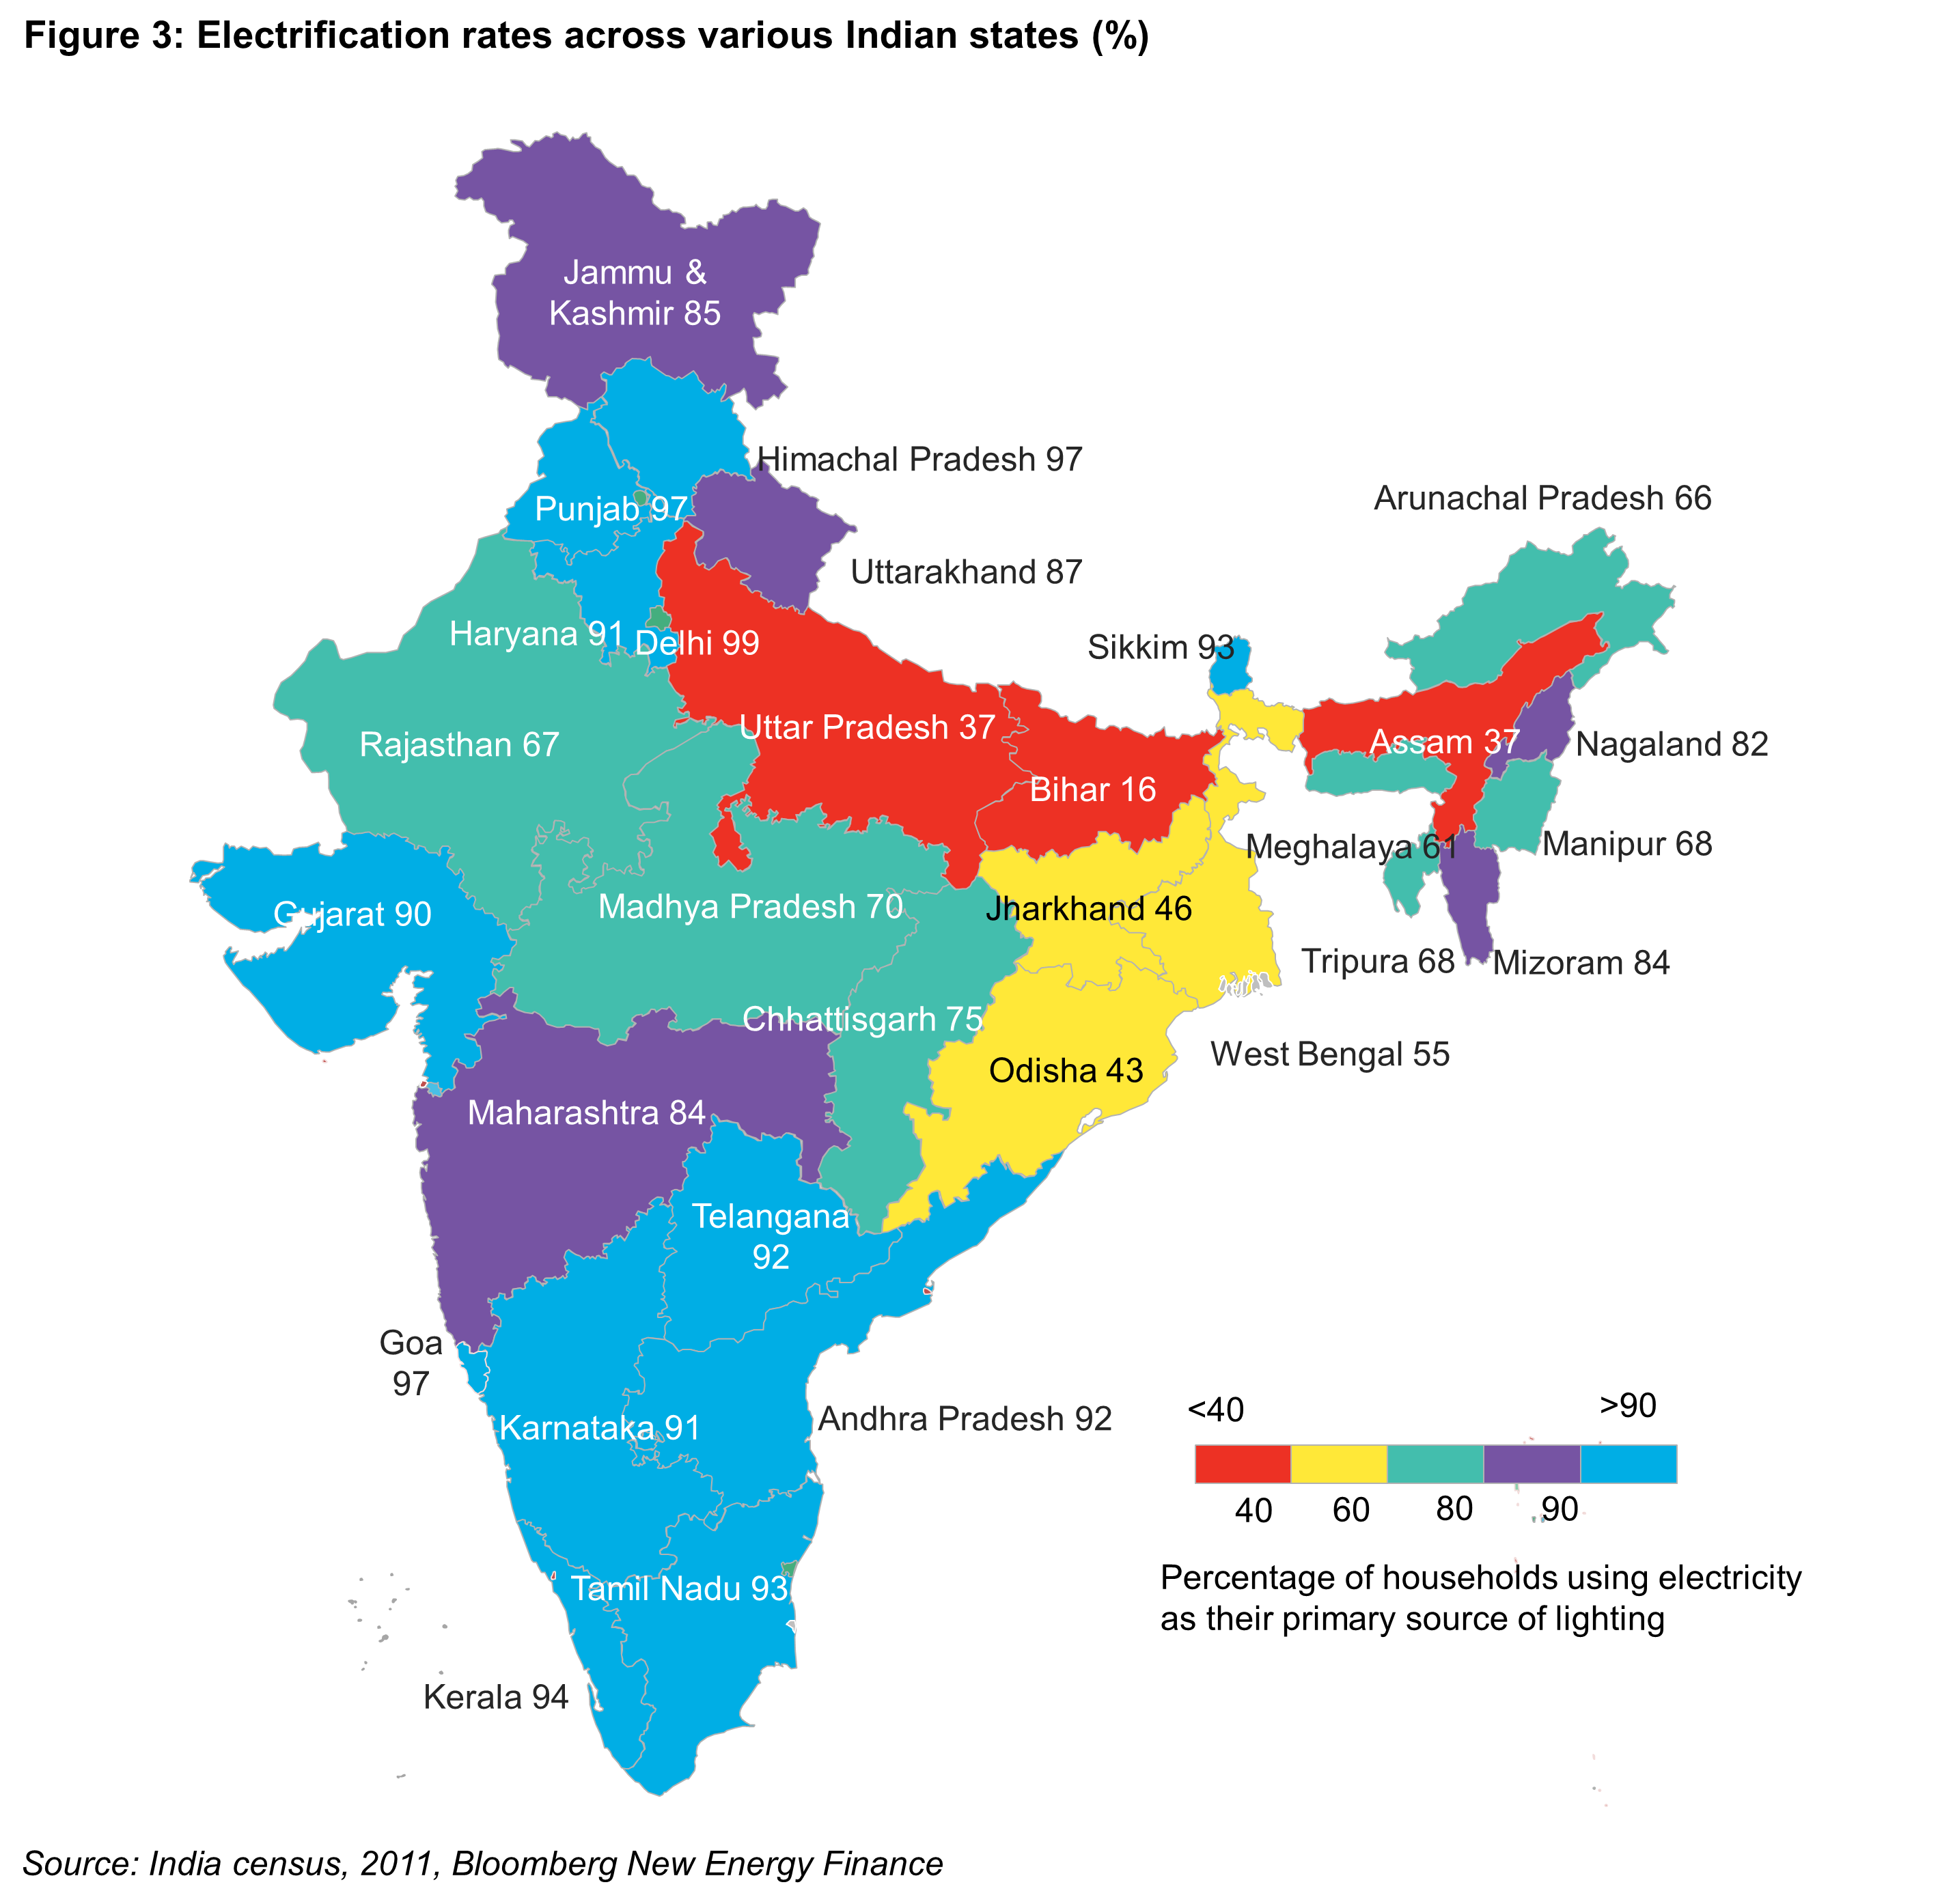 OG - Fig3 - Electrification rates across various Indian states